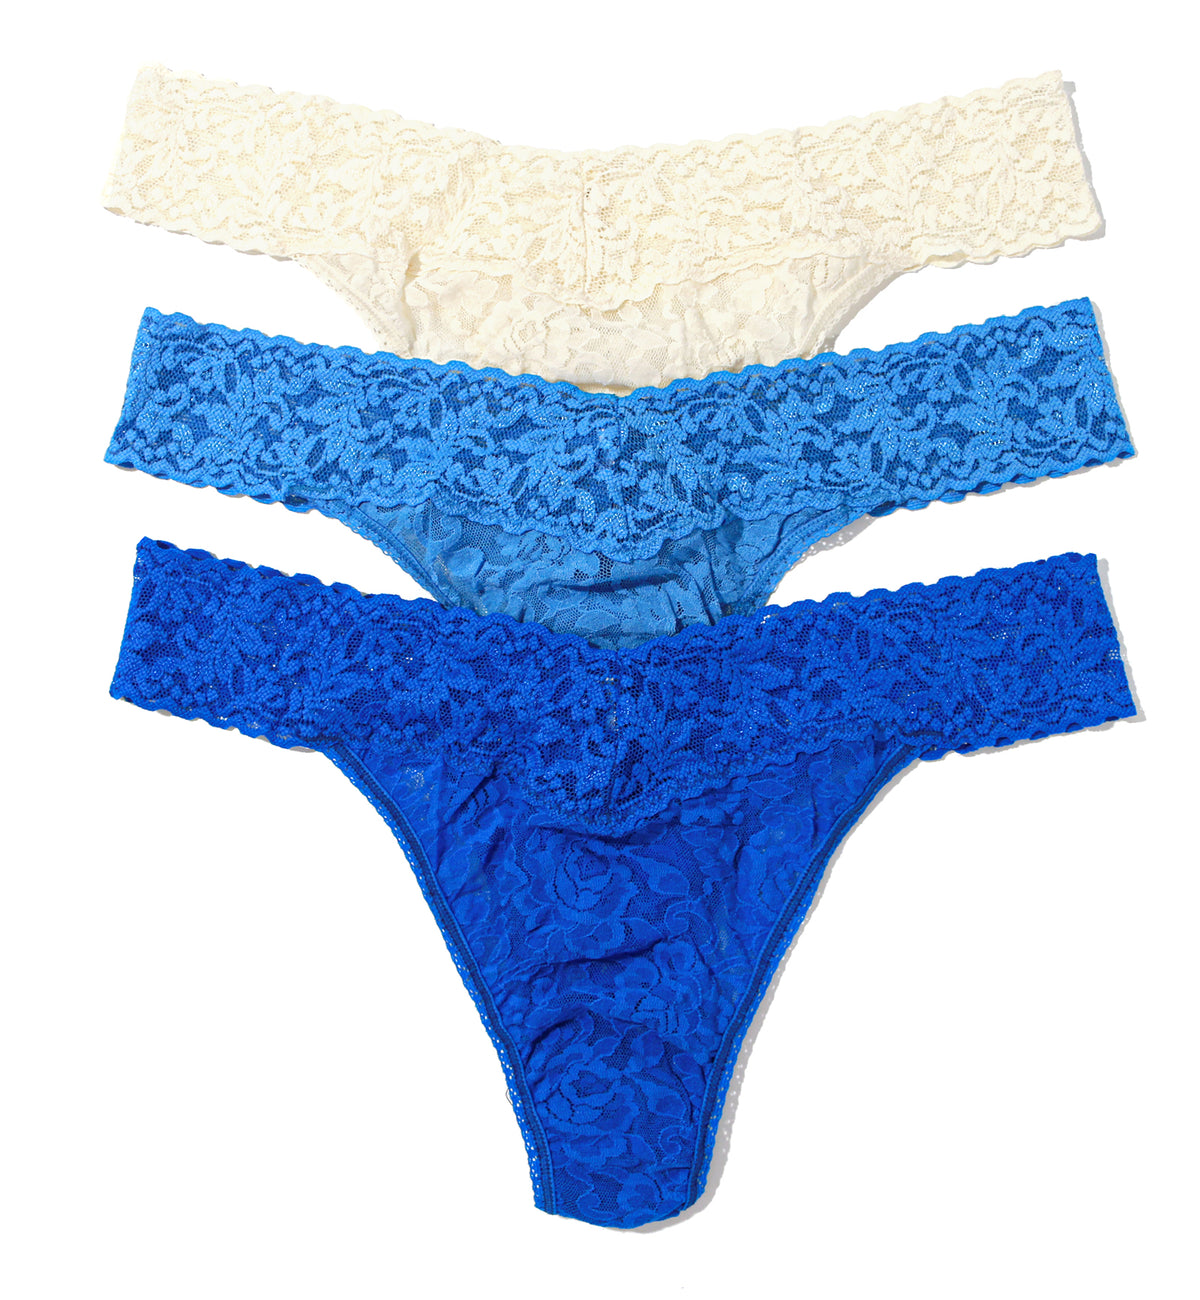 Hanky Panky 3-PACK Signature Lace Original Rise Thong (48113PK),Sea You - Ivory/ Forget Me Not/ Sapphire,One Size